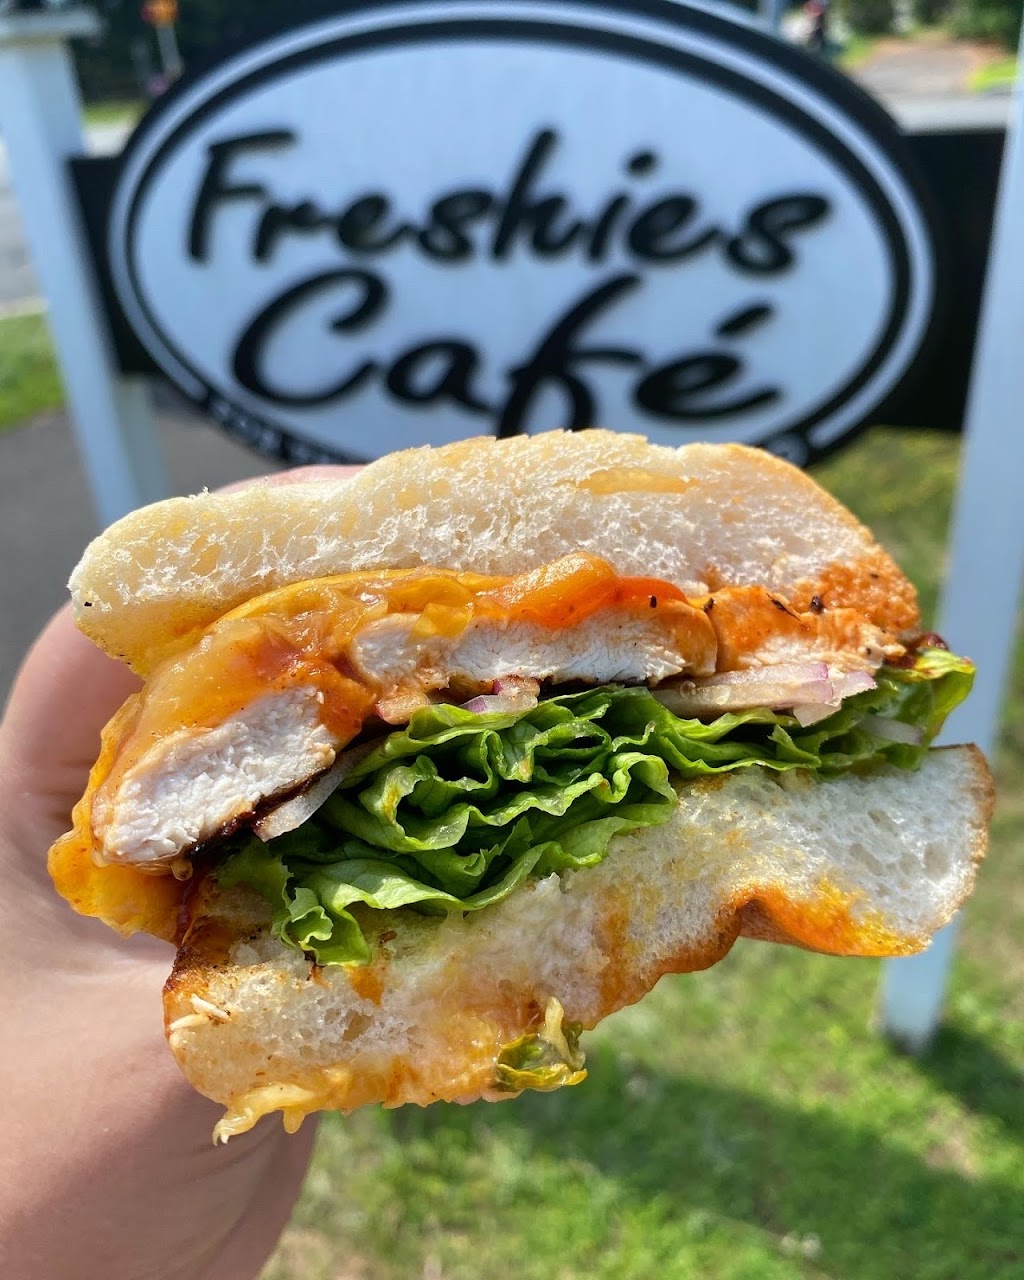 Freshies Cafe | 83 Salmon Brook St, Granby, CT 06035 | Phone: (860) 413-9191